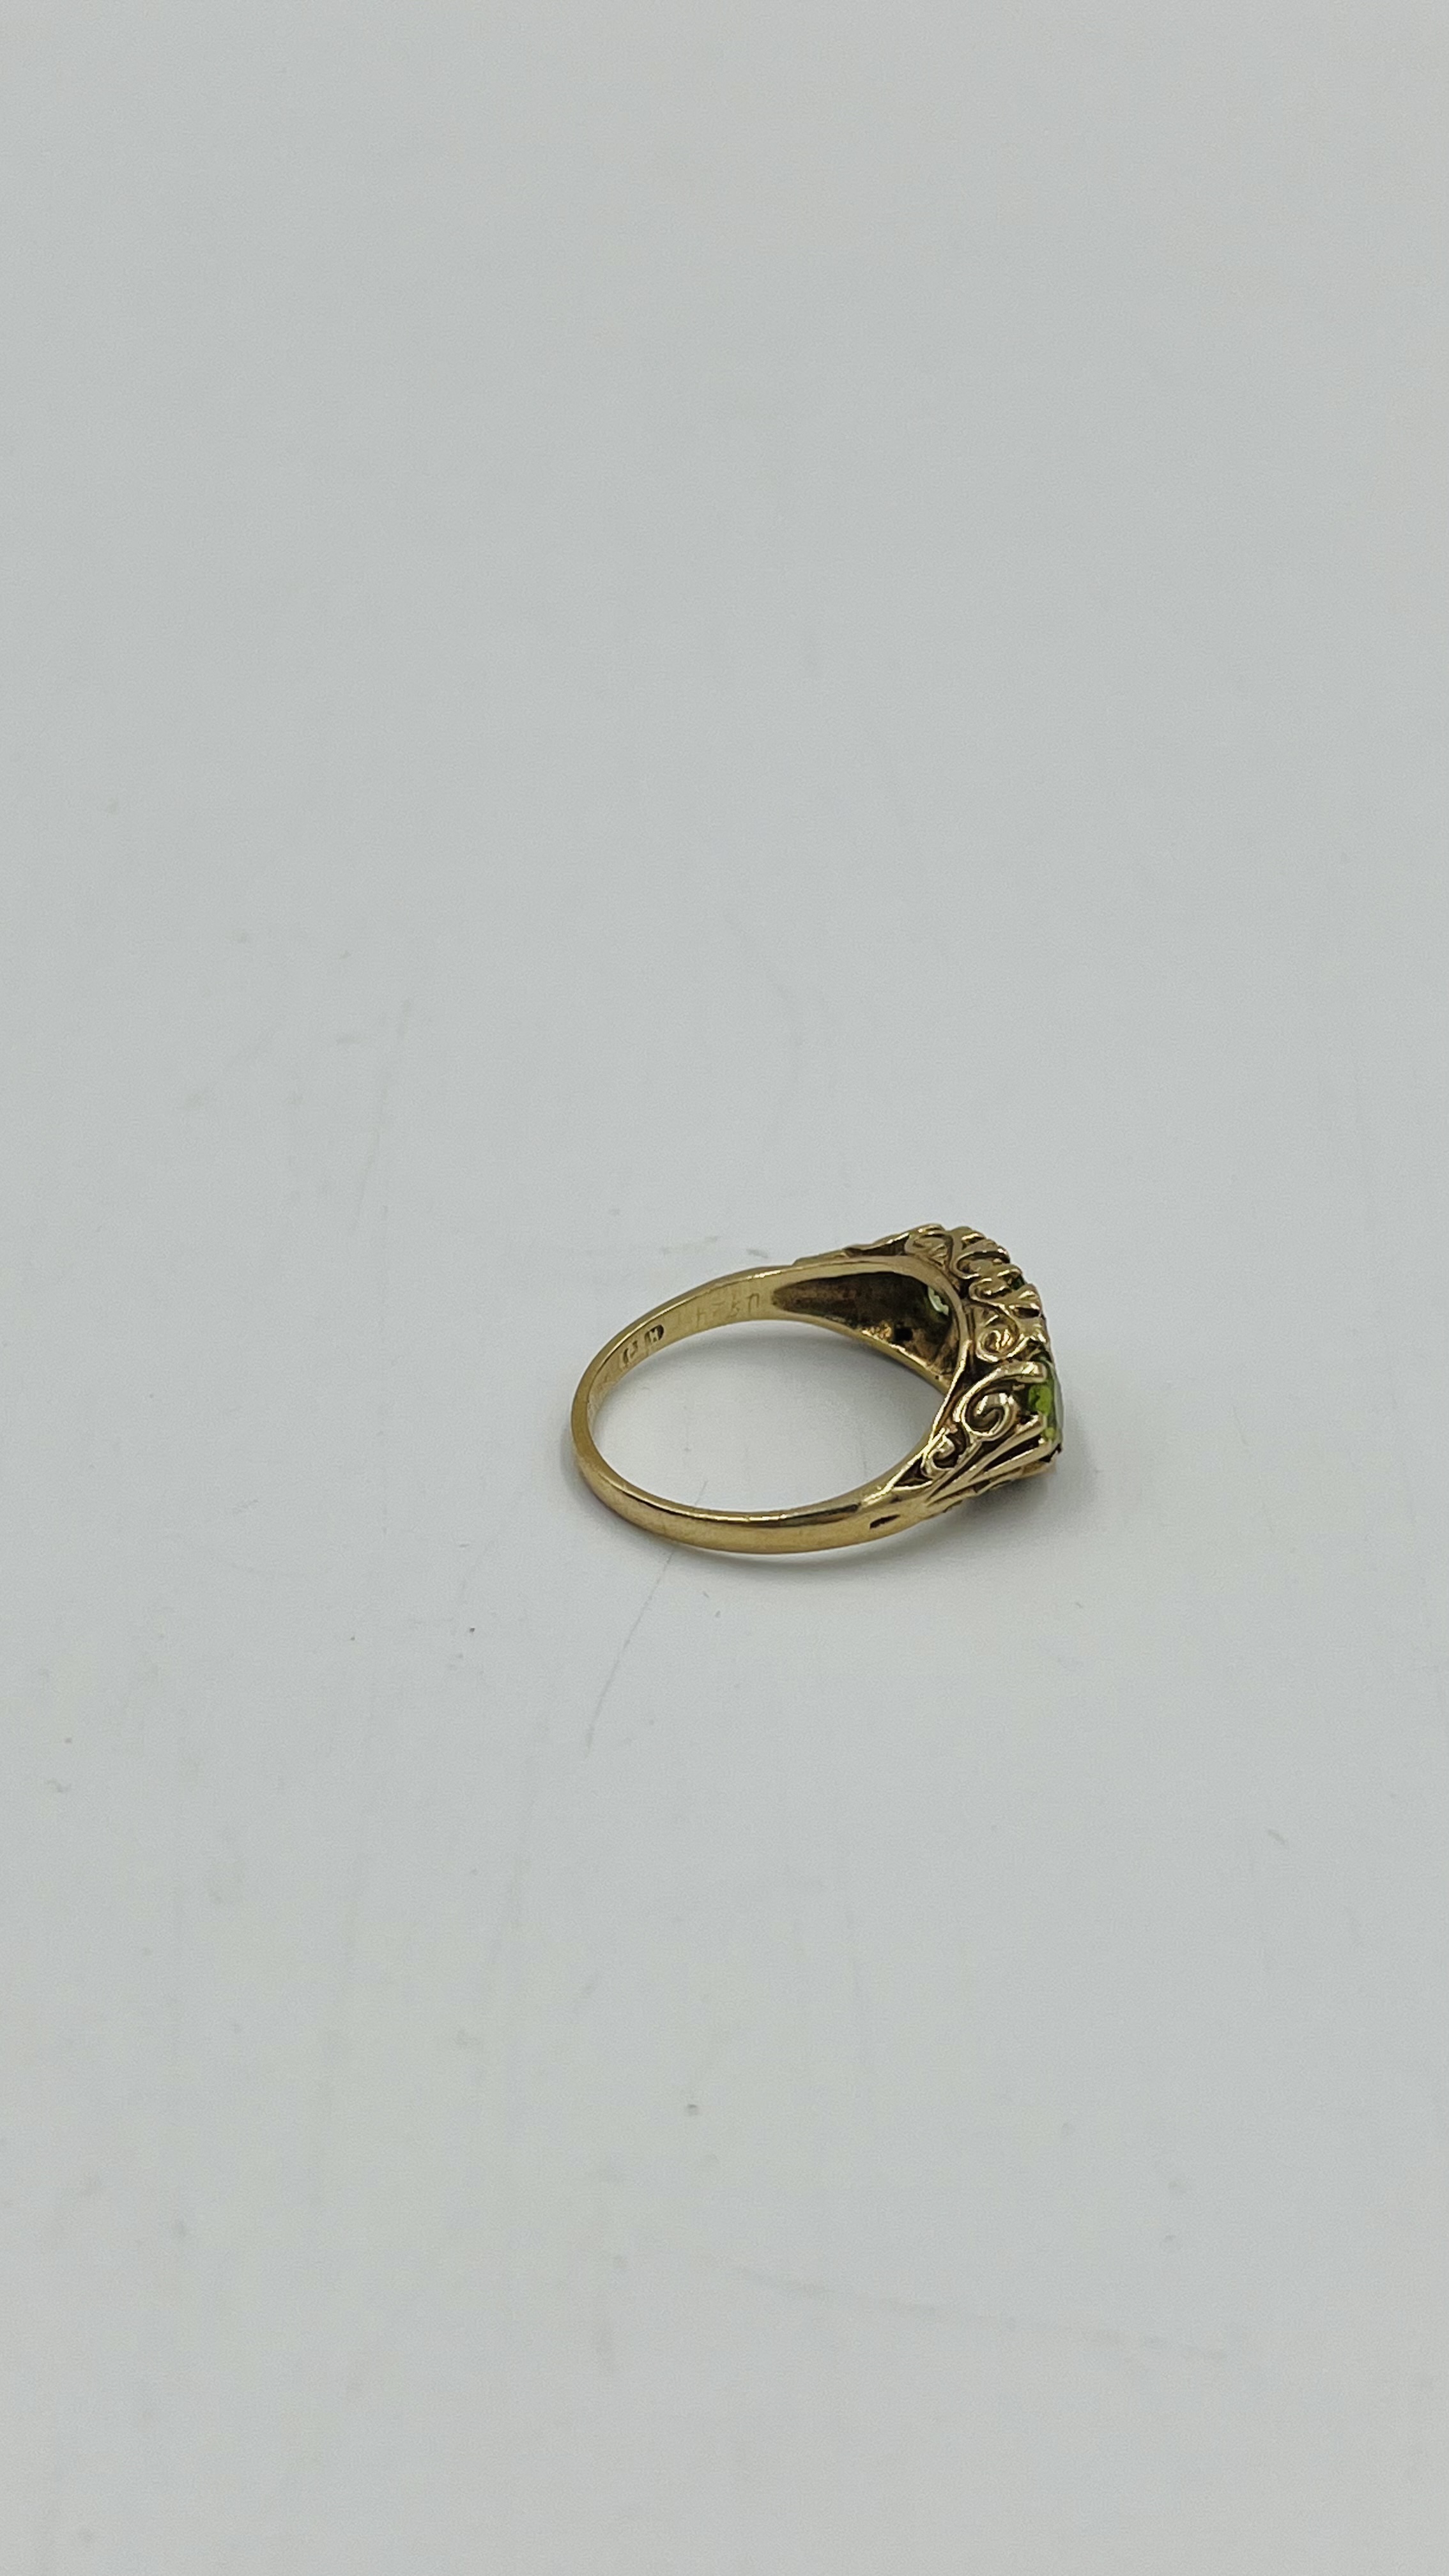 9ct gold ring set with a green stone - Image 3 of 4